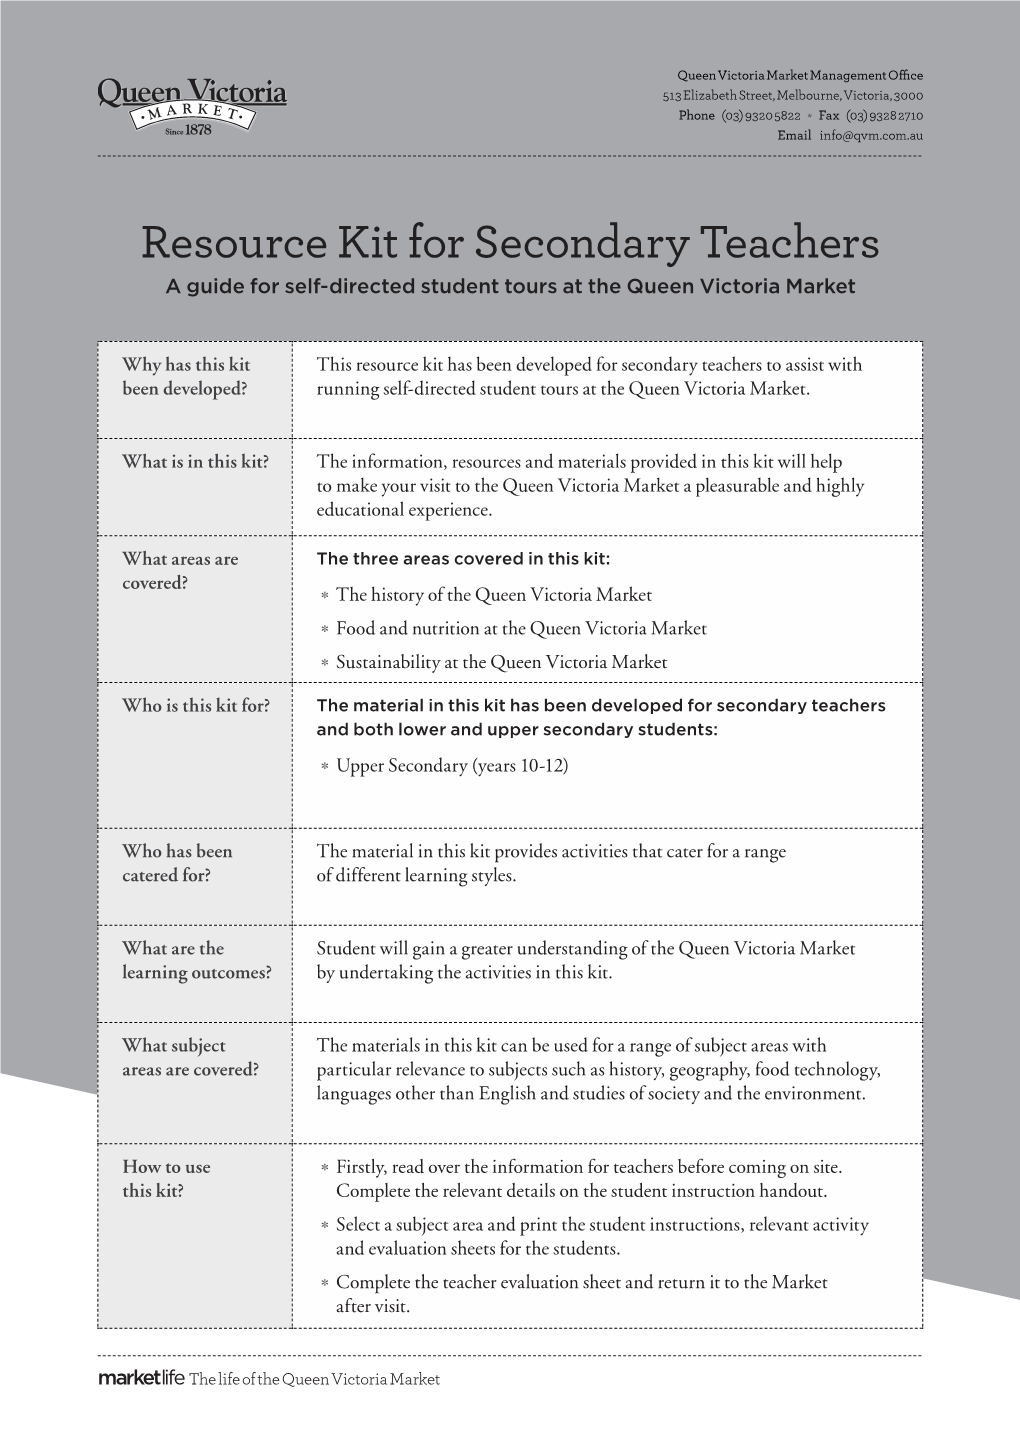 Resource Kit for Secondary Teachers a Guide for Self-Directed Student Tours at the Queen Victoria Market